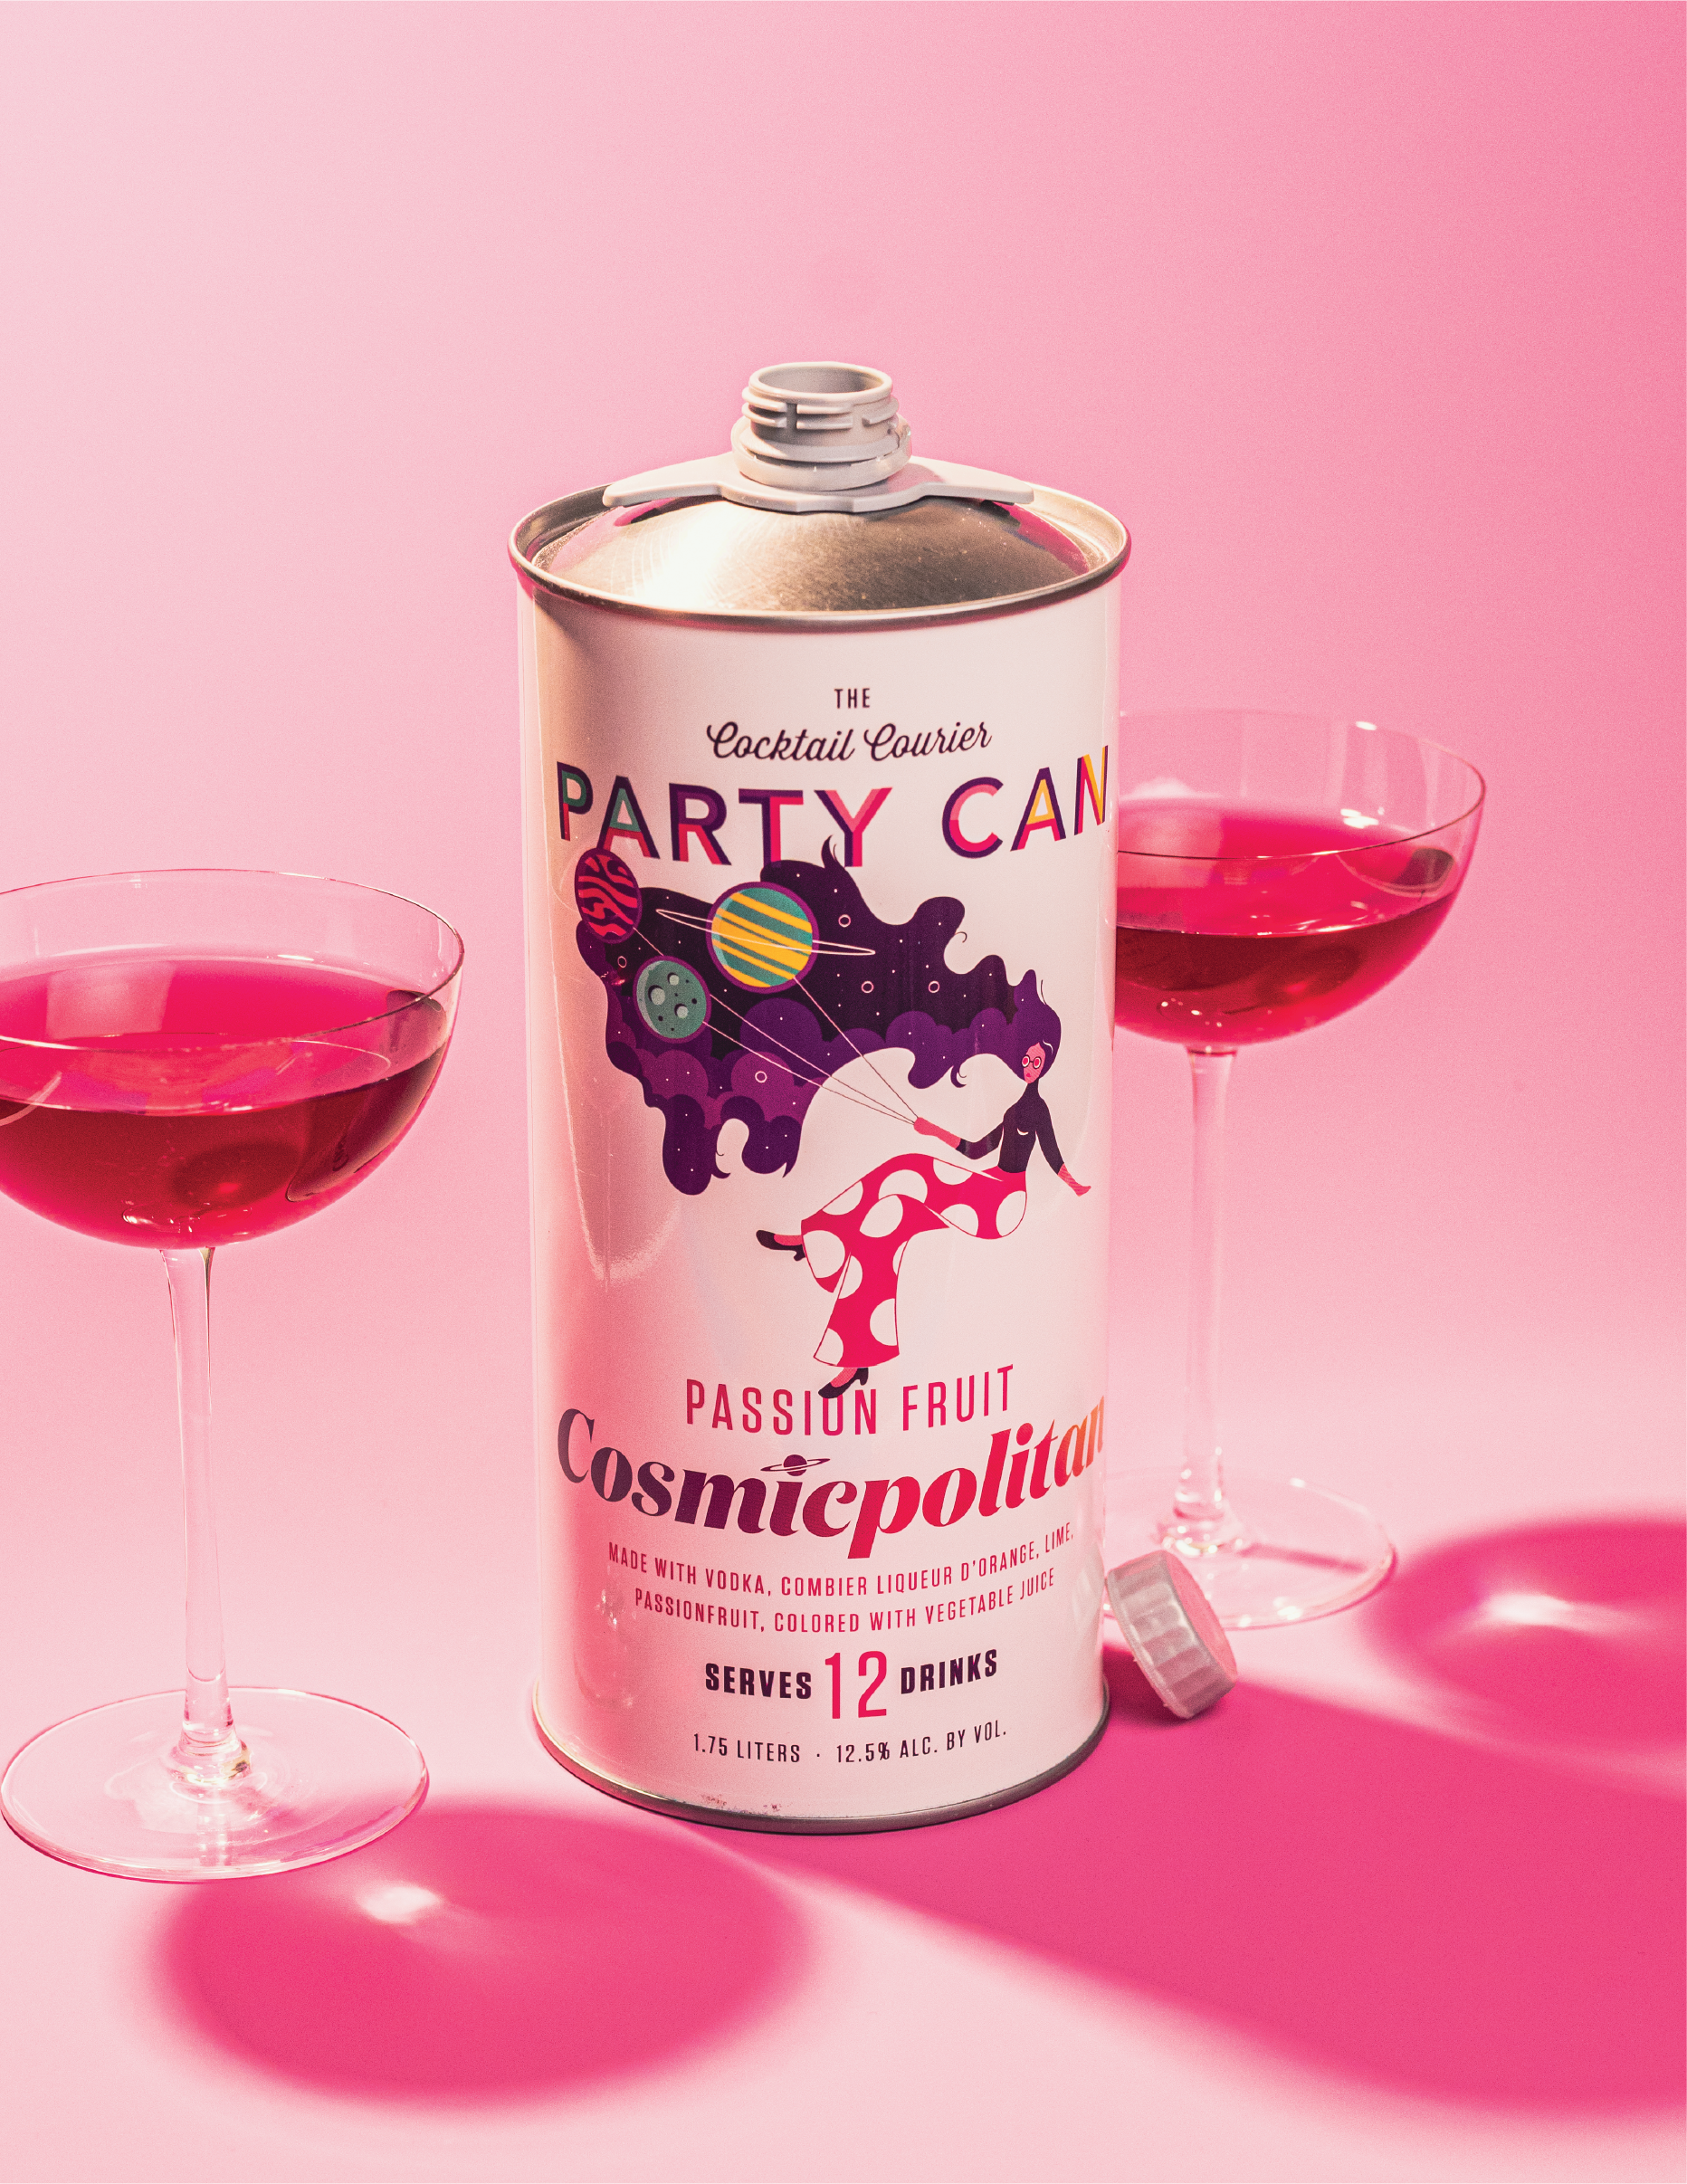 The Party Can Cosmicpolitan Can with the box it comes within and the deep red cocktails in a glass with ice.